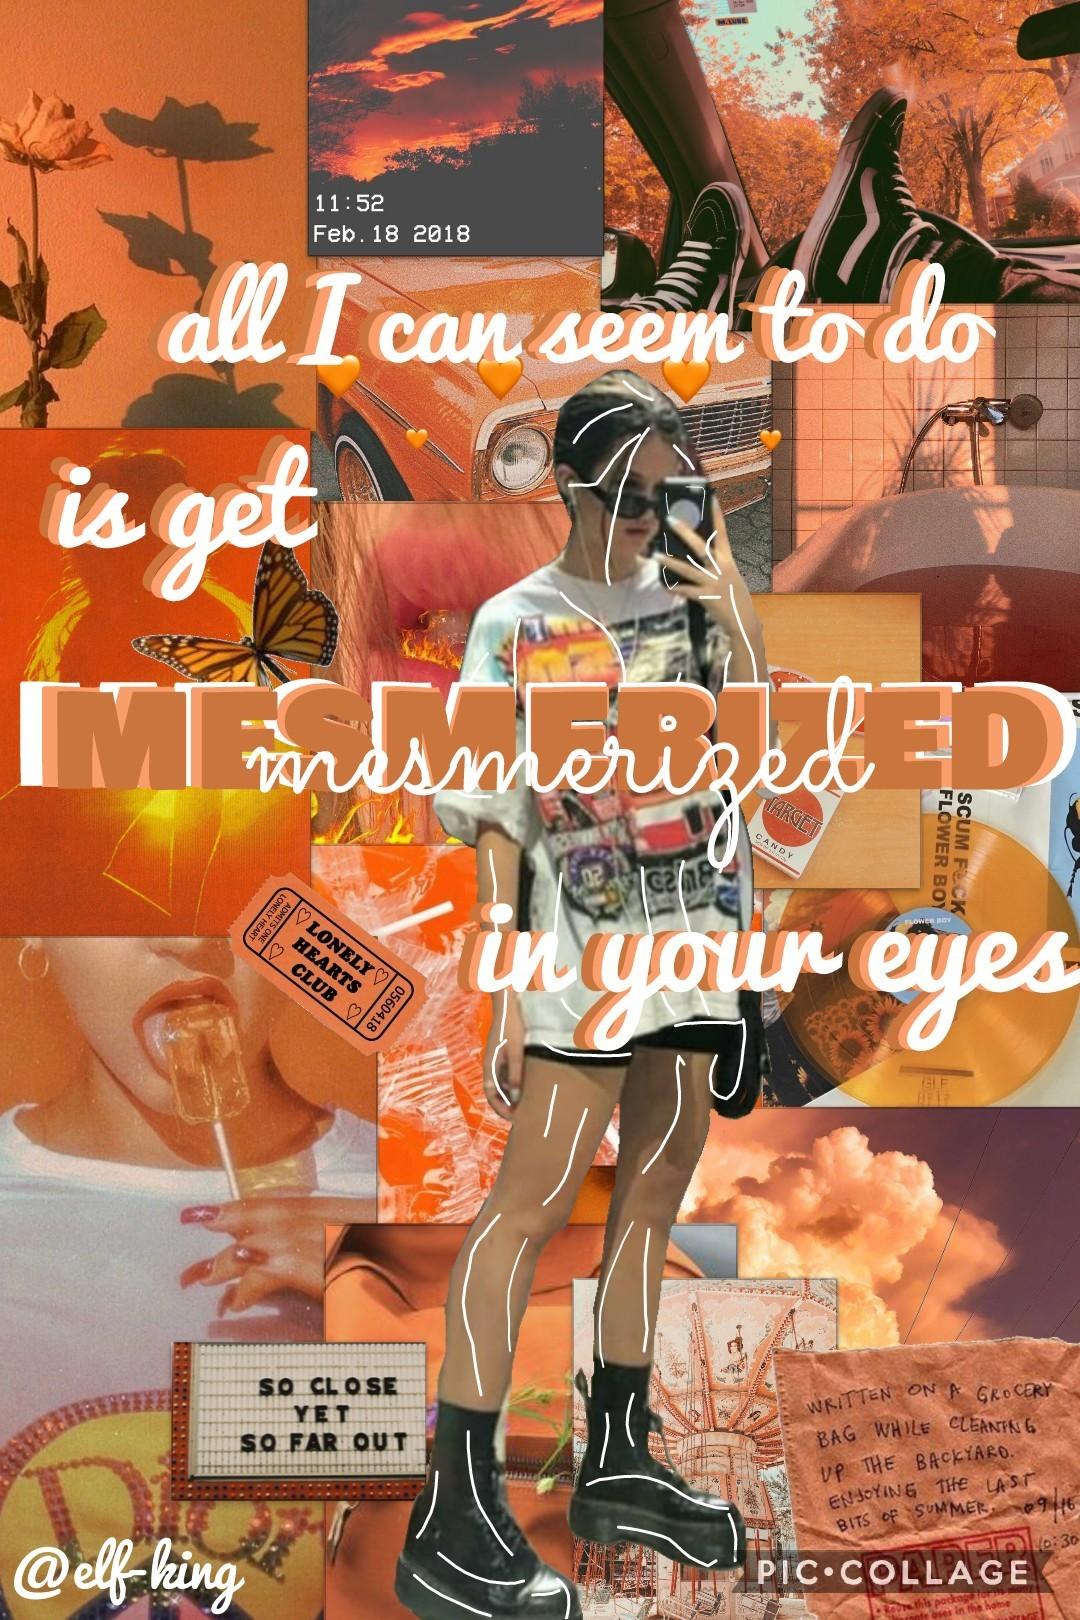 i have made so many collages recently that i don't even know what this is or what i made it for but... boom orange... ness 😂
i actually don't think I've ever done orange so this was a fun experiment